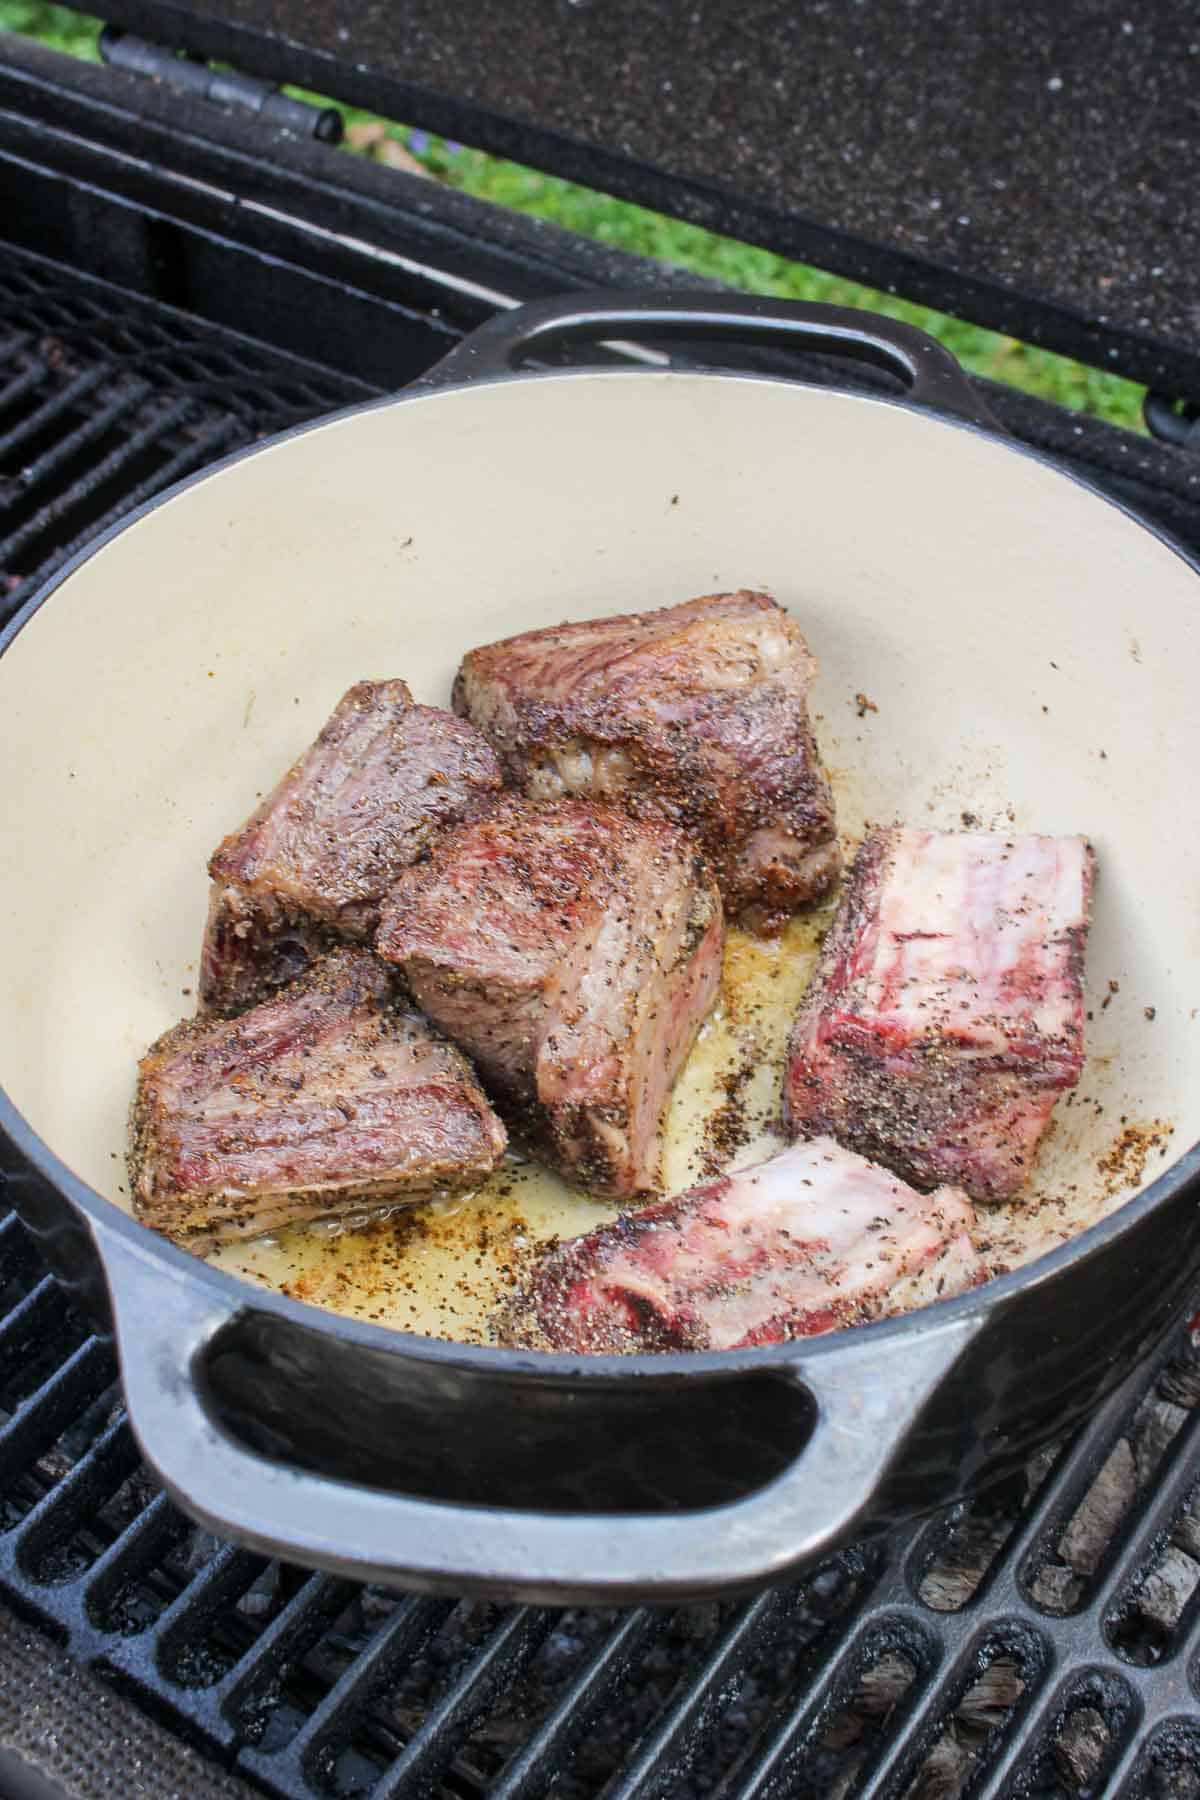 The short ribs after getting seasoned and starting to sear in the dutch oven.